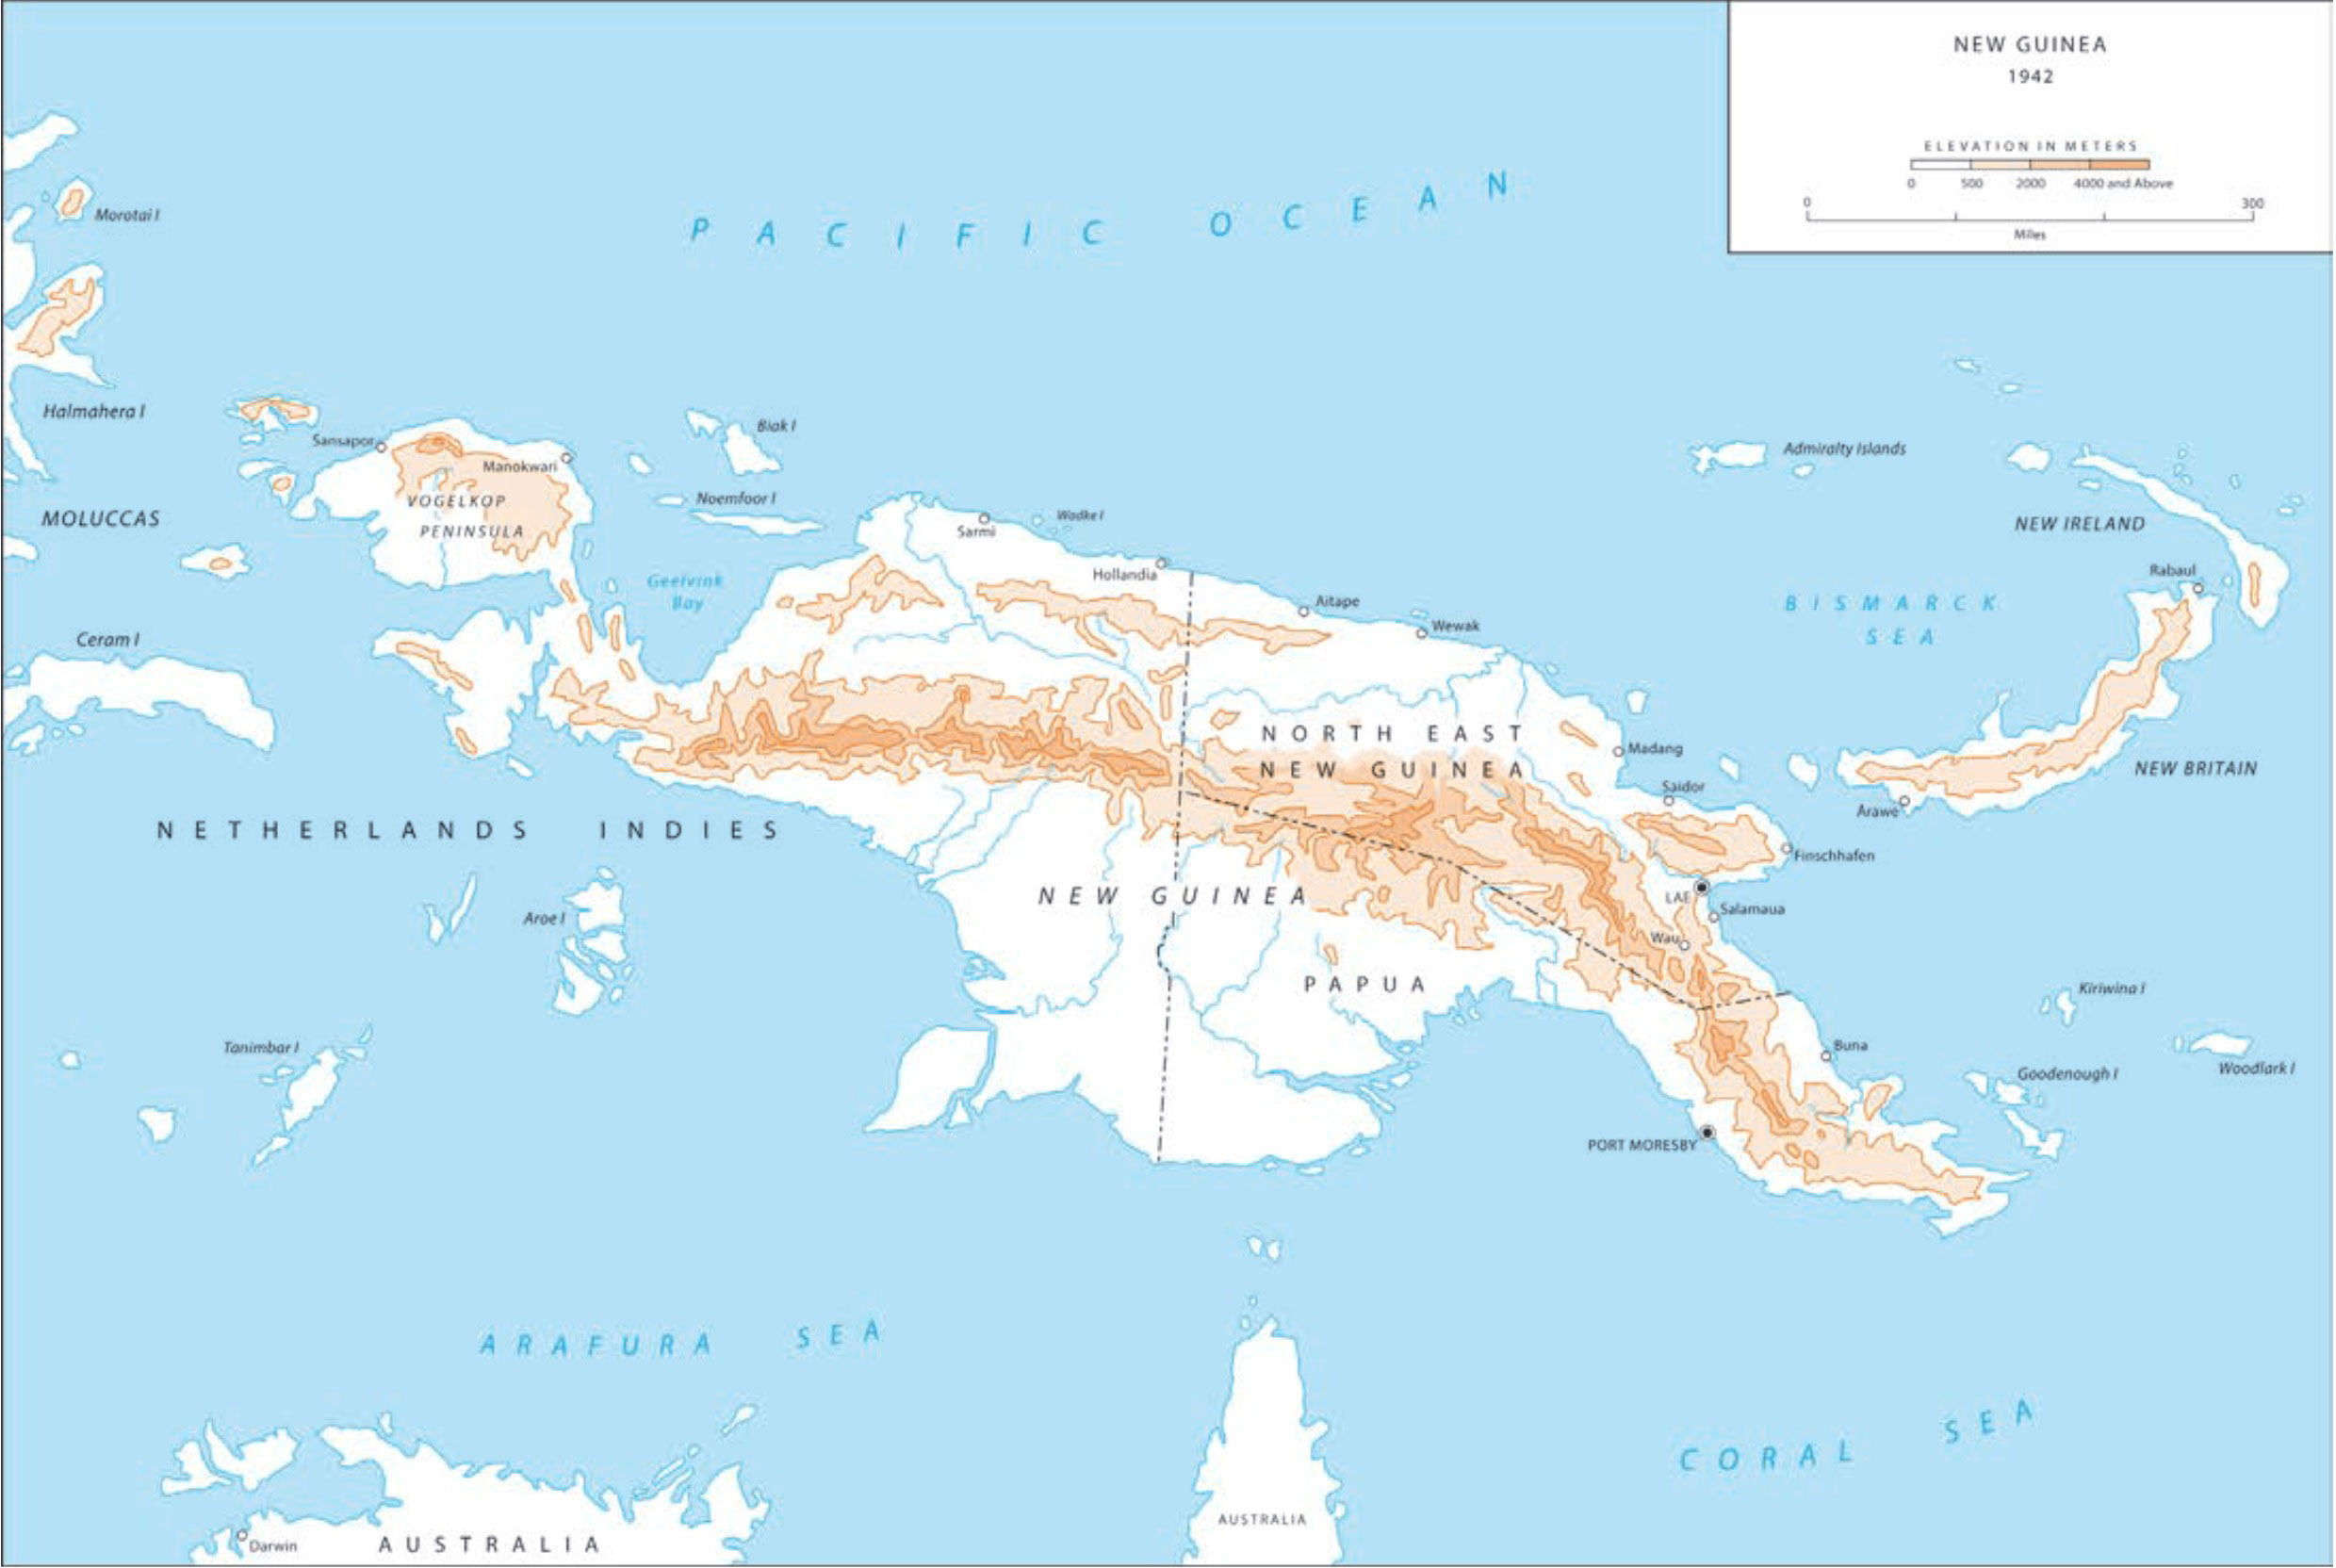 Map of New Guinea in 1942